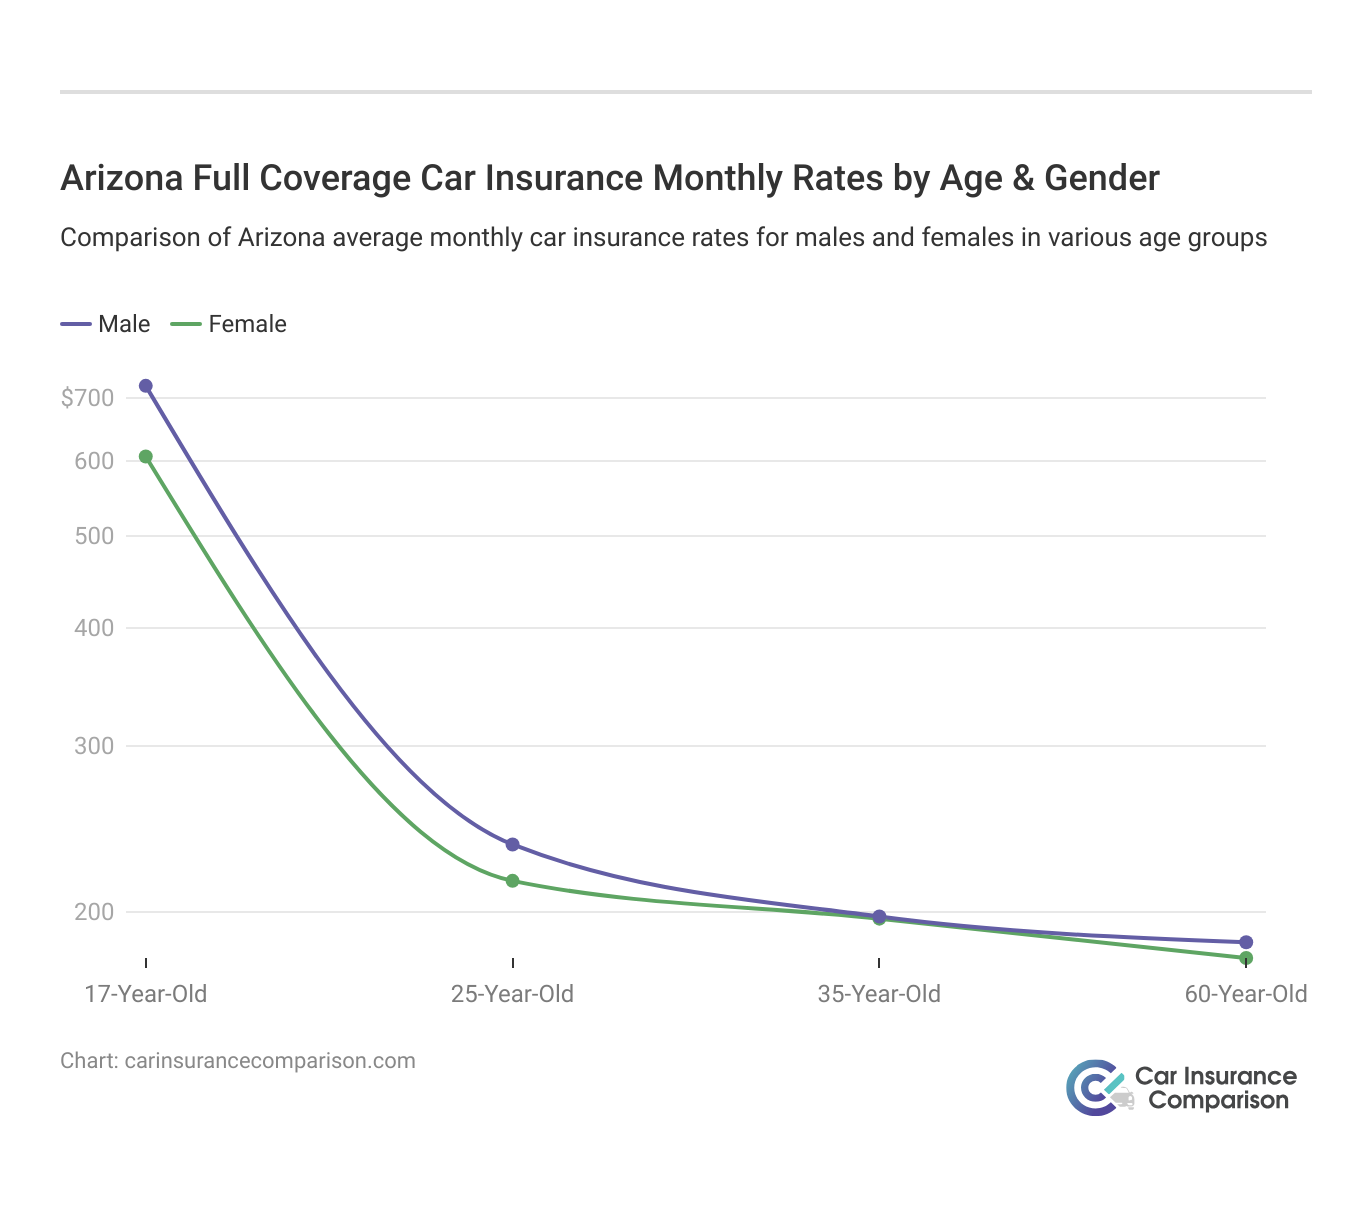 <h3>Arizona Full Coverage Car Insurance Monthly Rates by Age & Gender</h3>